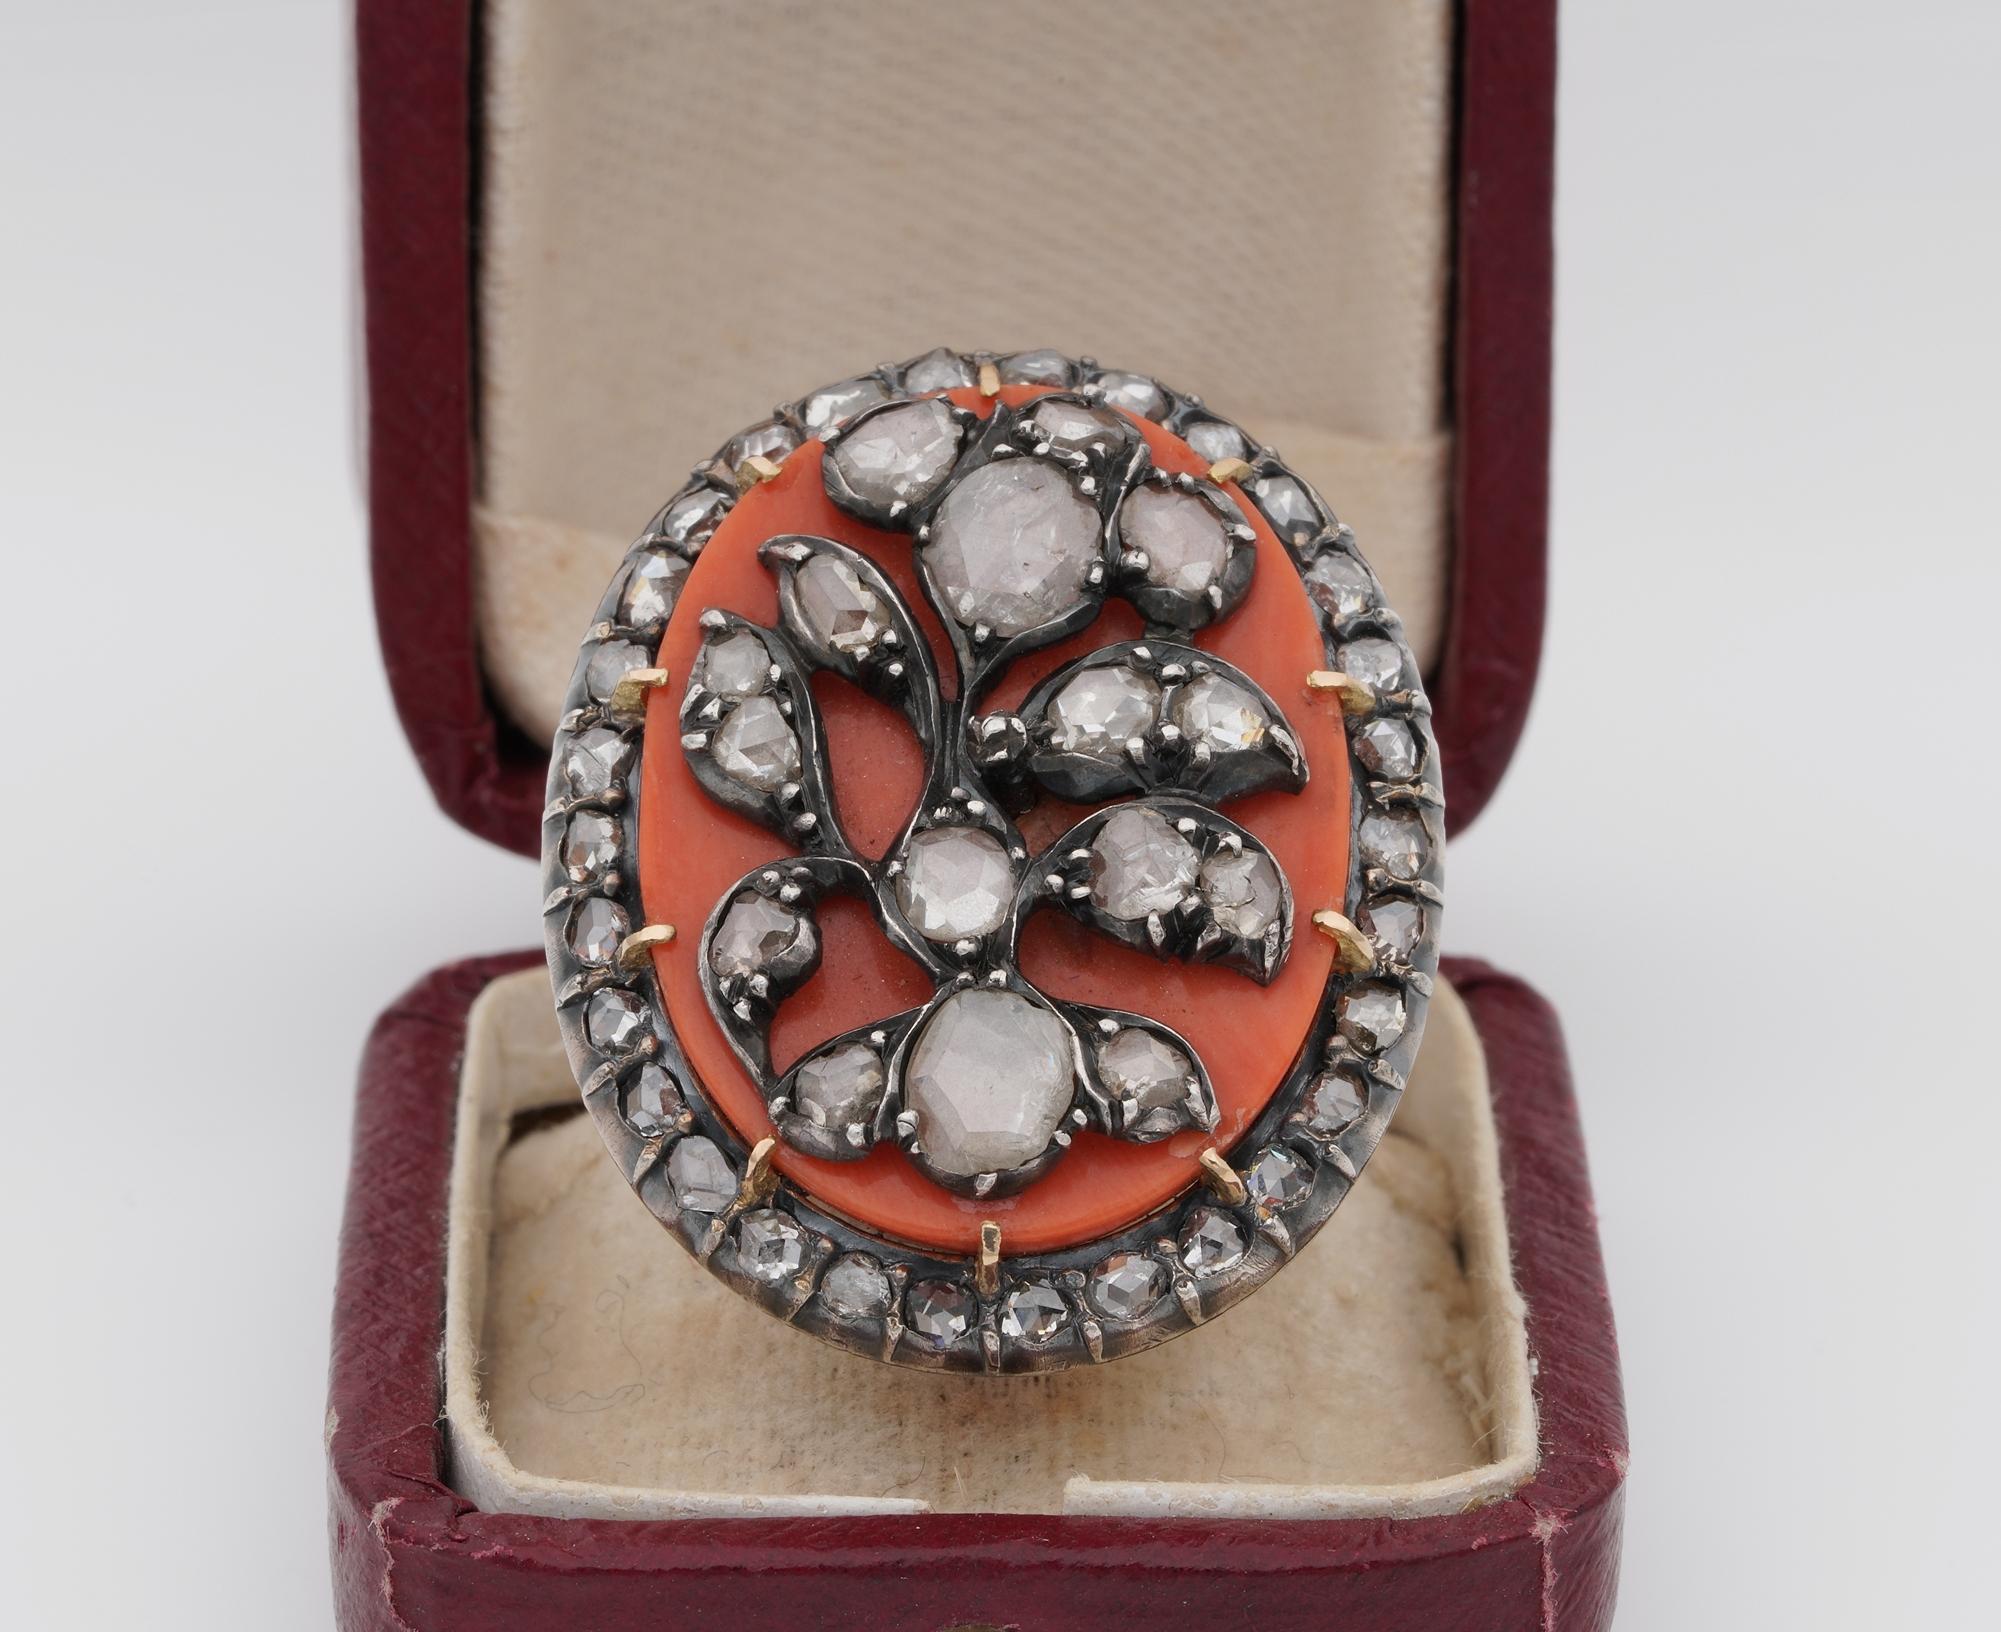 Magnificent from the Georgian period – 1820 ca, Italian origin; rare Giardinetti ring

Opulent large size for the big oval crown, set with a large and very deep cut antique orange Sciacca Coral, holding the Giardinetti motif, set with a myriad of